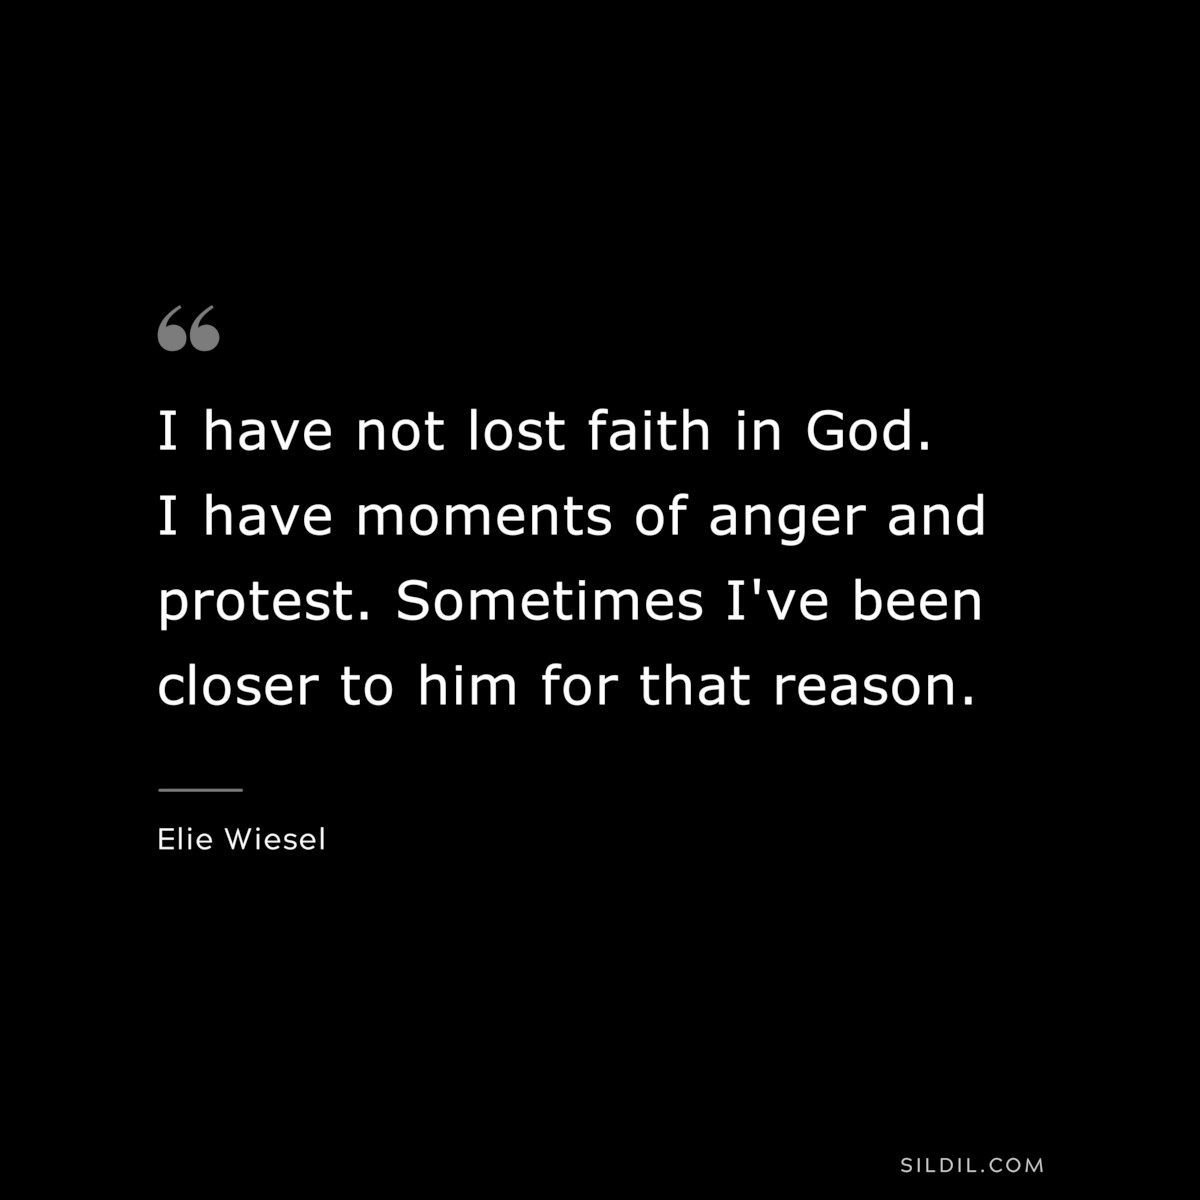 I have not lost faith in God. I have moments of anger and protest. Sometimes I've been closer to him for that reason. ― Elie Wiesel